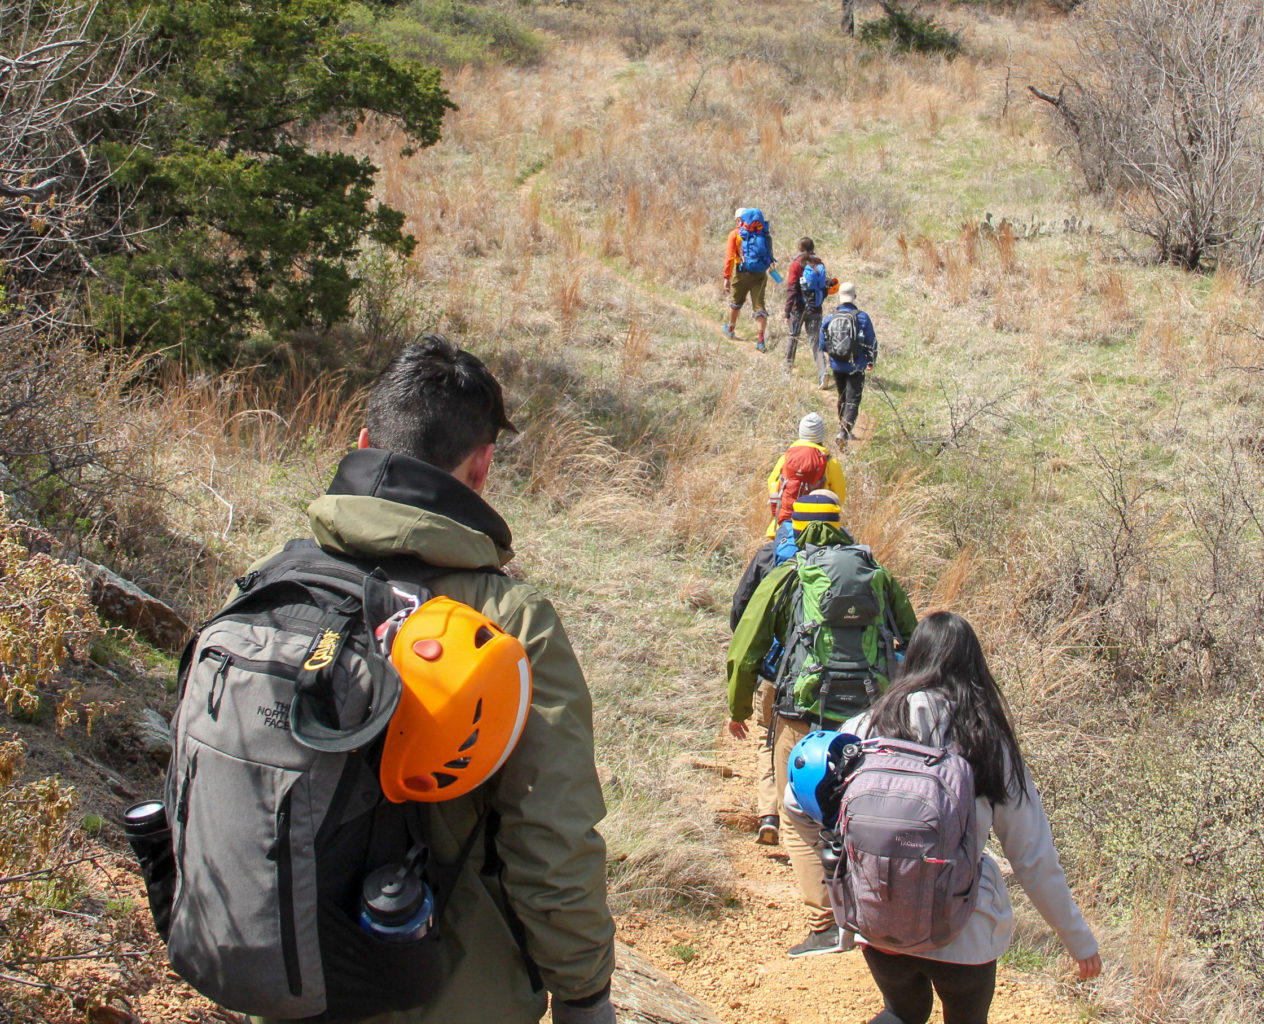 A group of students on a hiking trip.